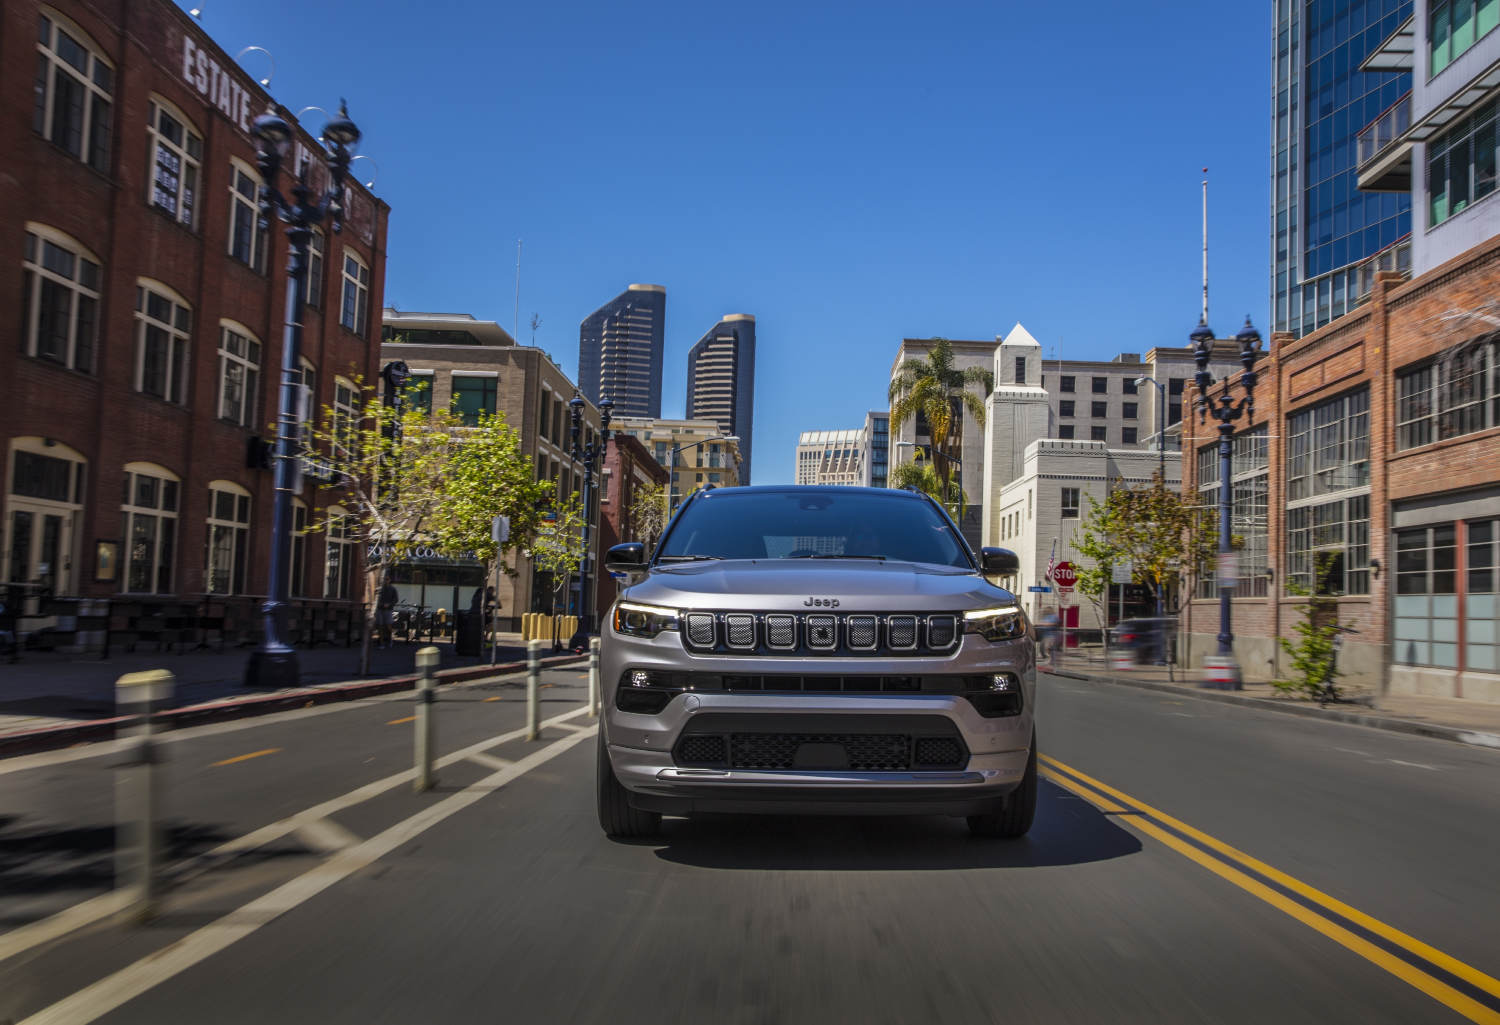 This compact SUV is the 2023 Jeep Compass